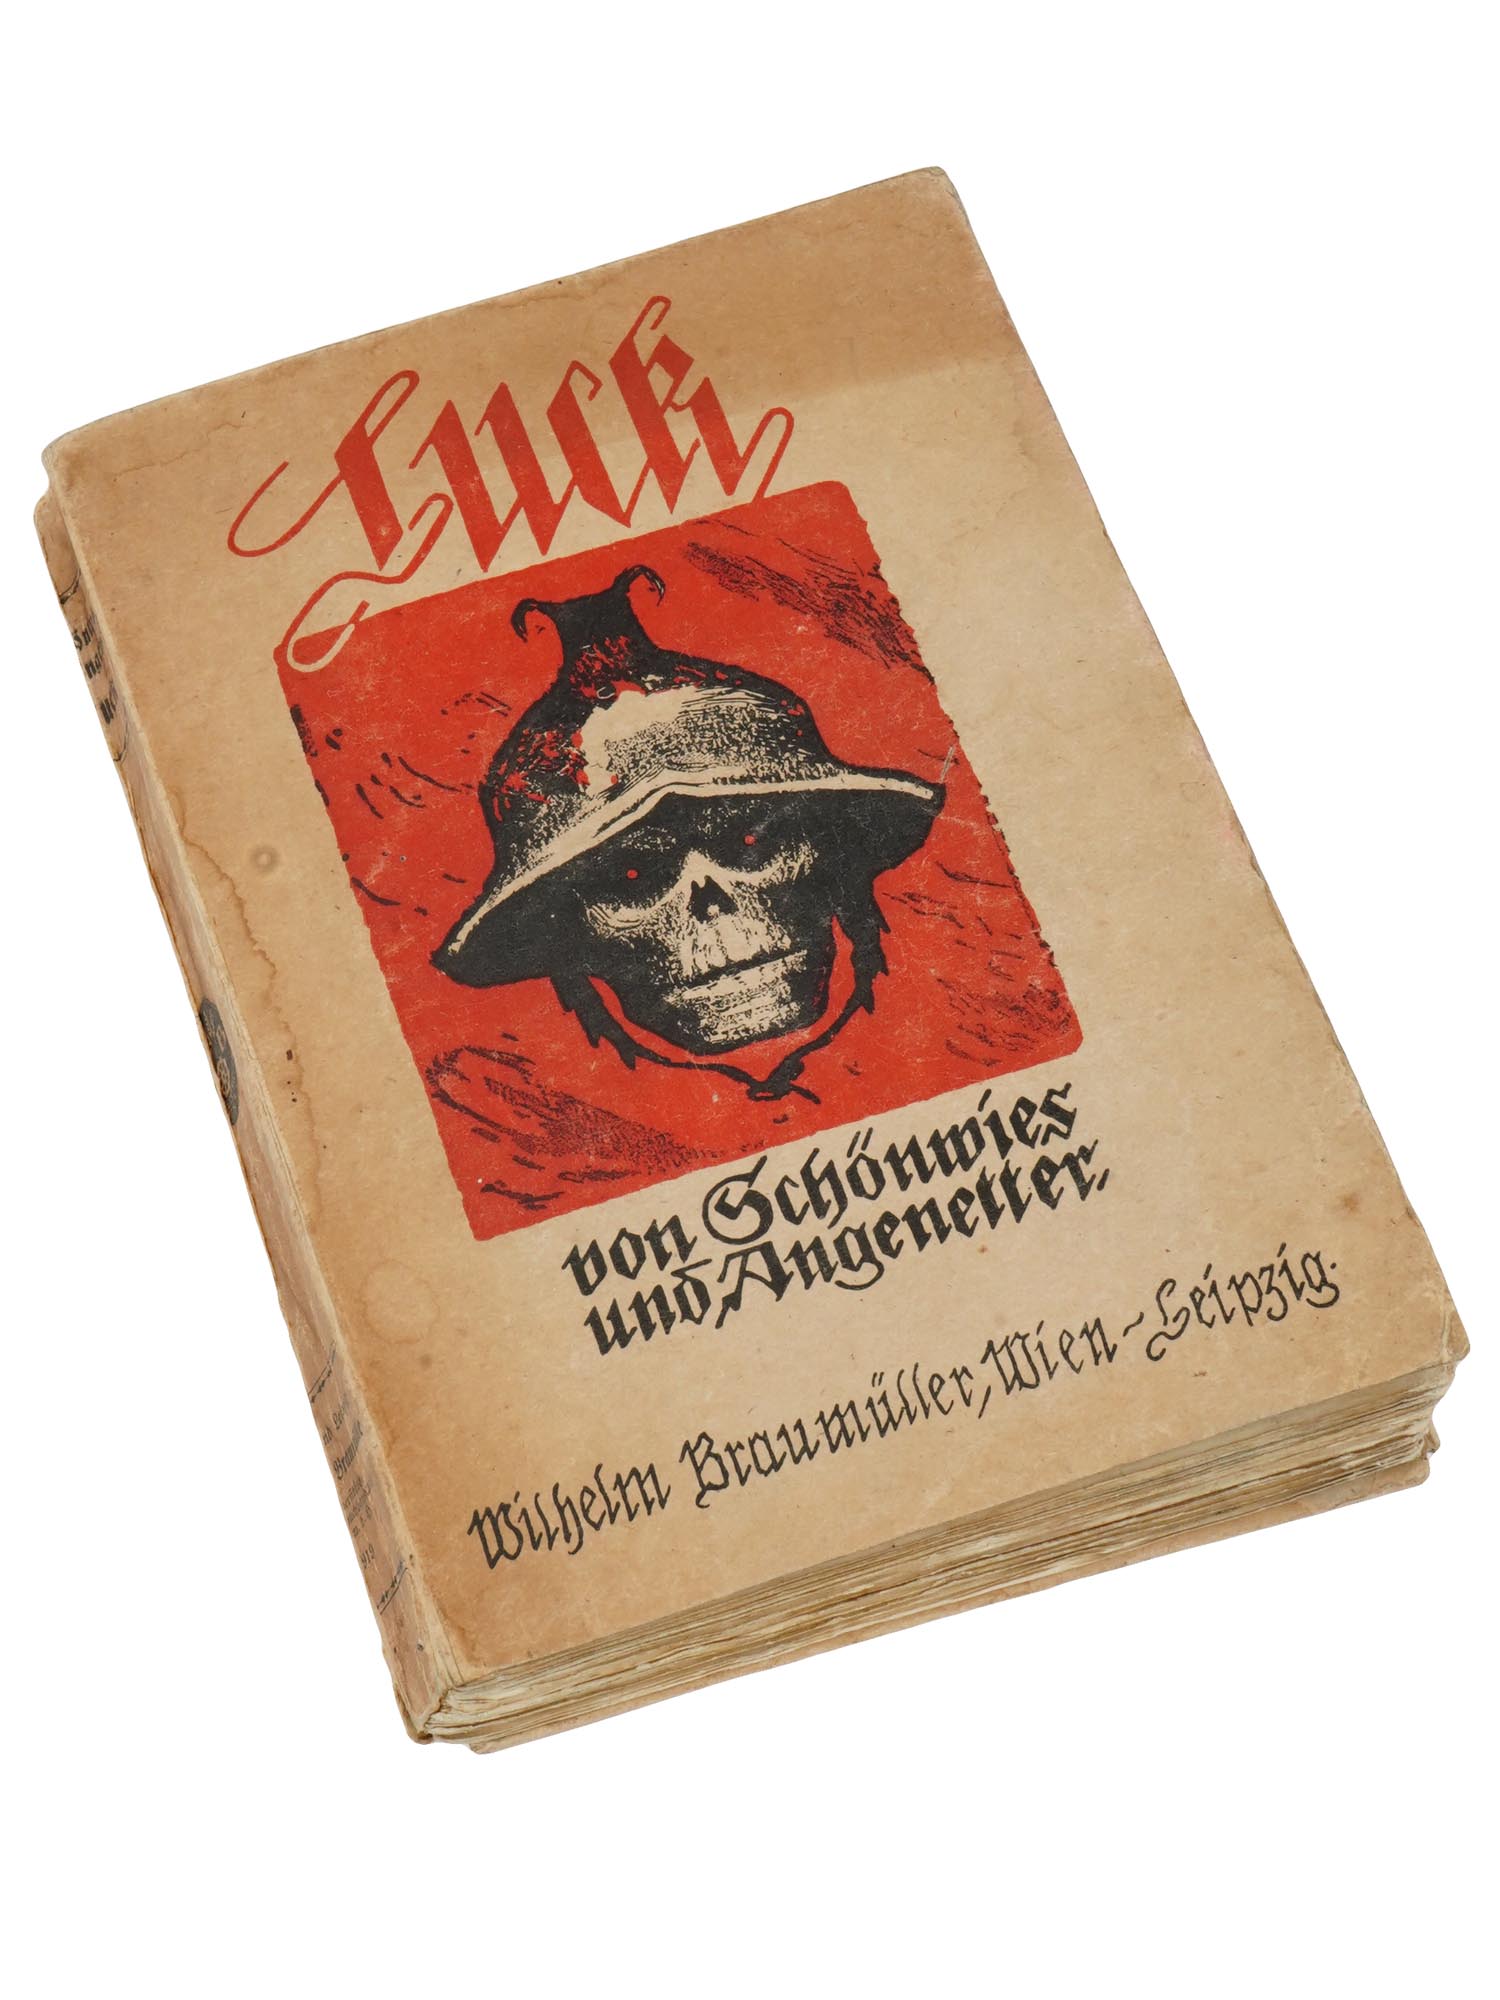 WWI RUSSIAN CAMPAIGN BOOK FROM ADOLF HITLERS LIBRARY PIC-1